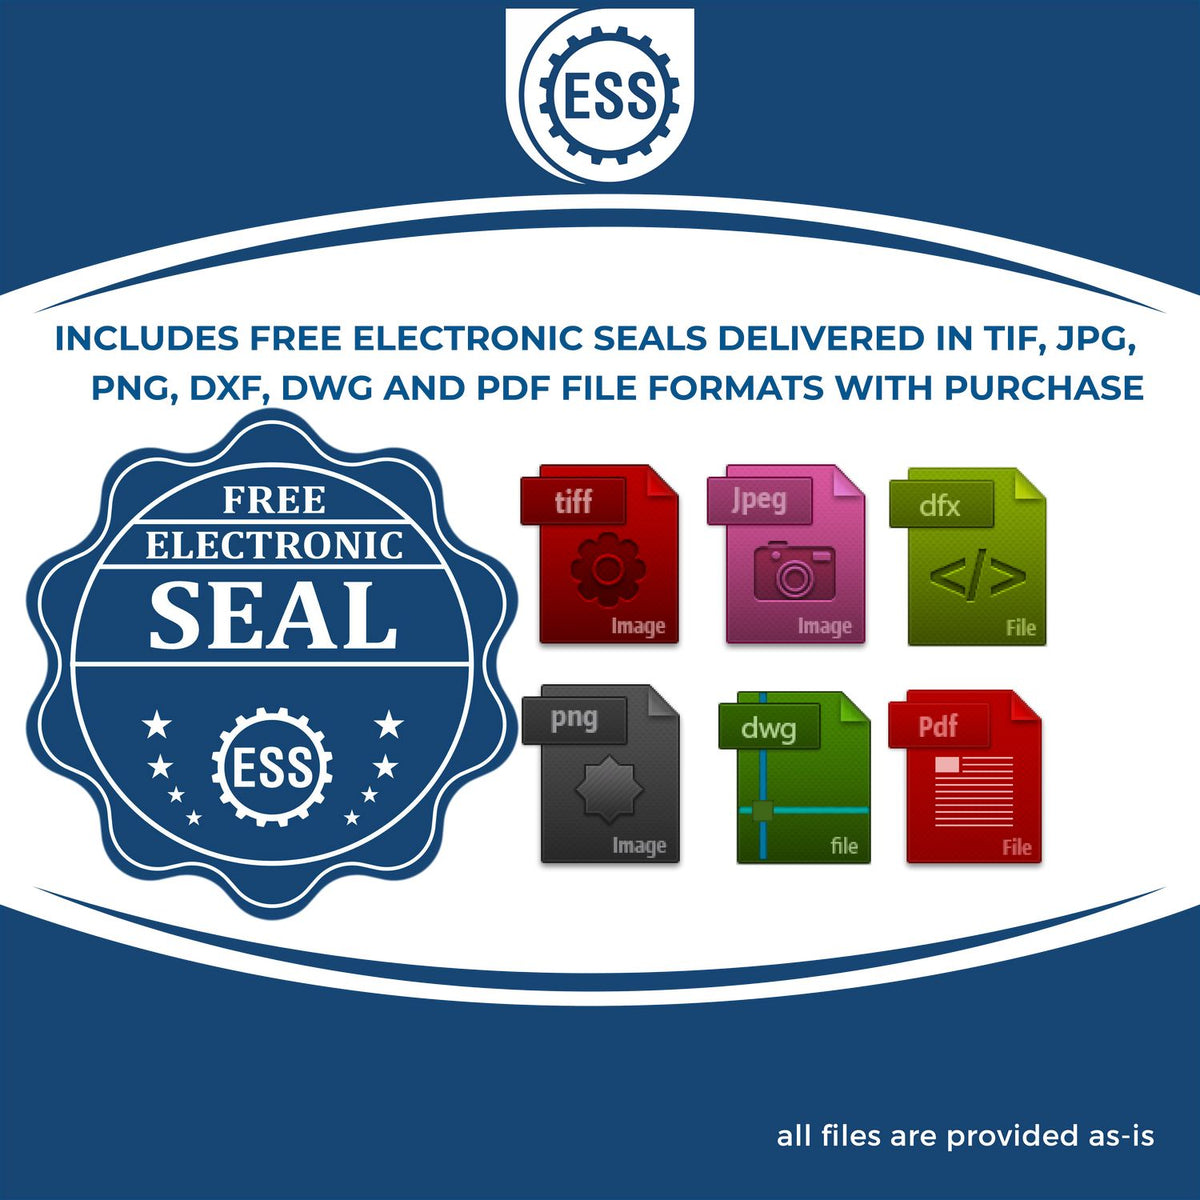 An infographic for the free electronic seal for the Heavy Duty Cast Iron Indiana Architect Embosser illustrating the different file type icons such as DXF, DWG, TIF, JPG and PNG.